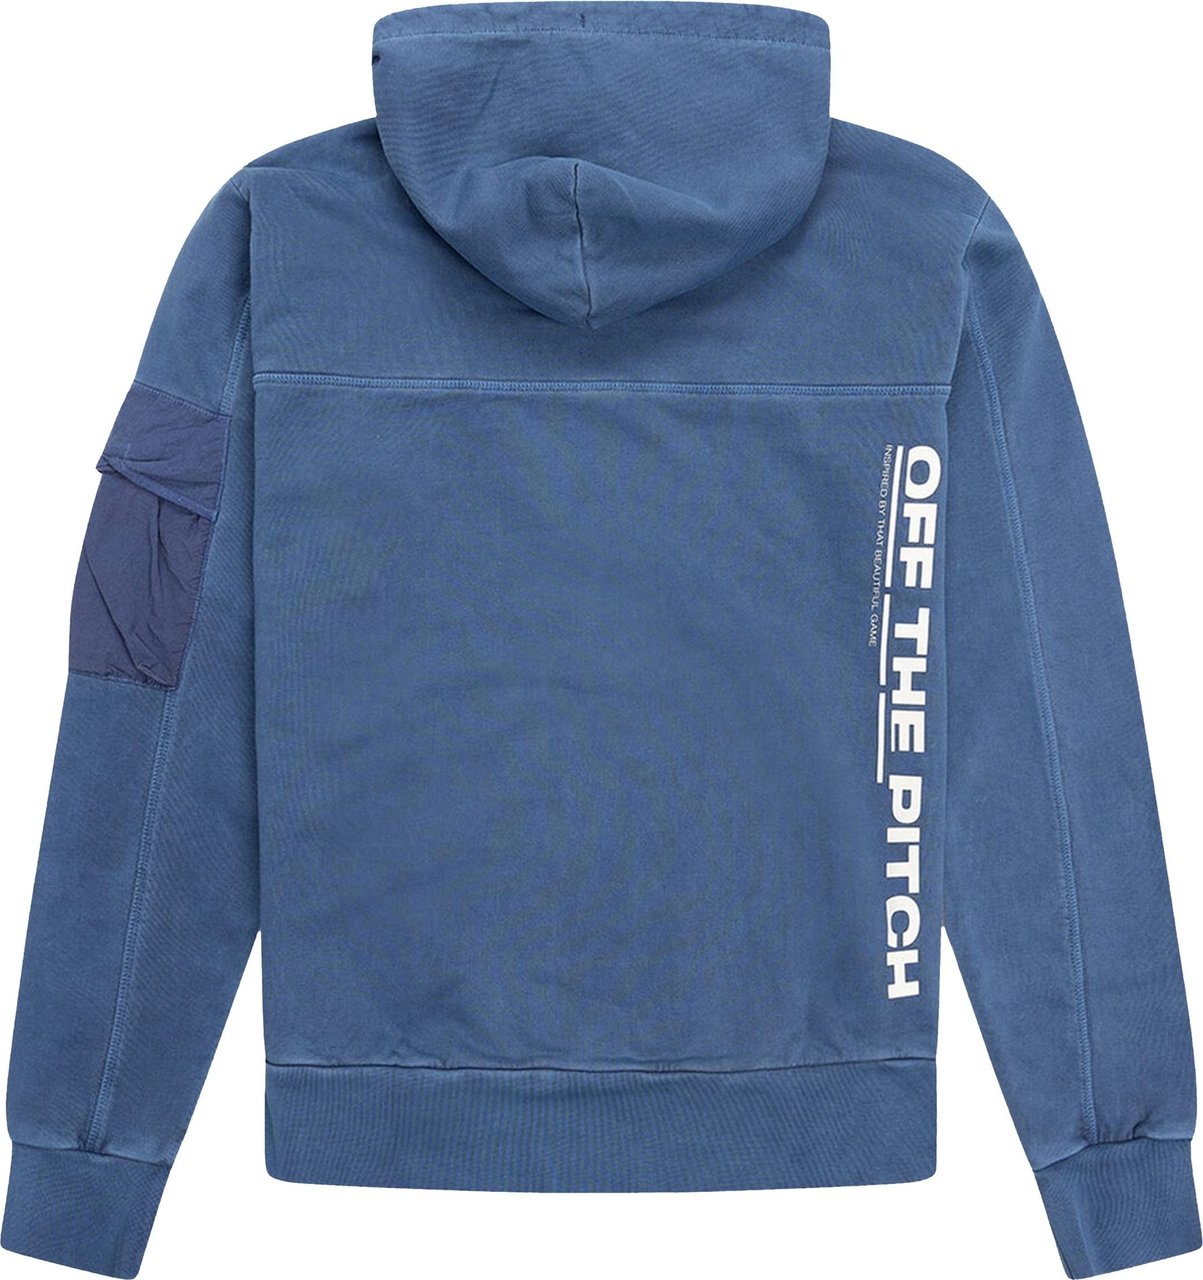 OFF THE PITCH Combat Sweatsuit Blauw